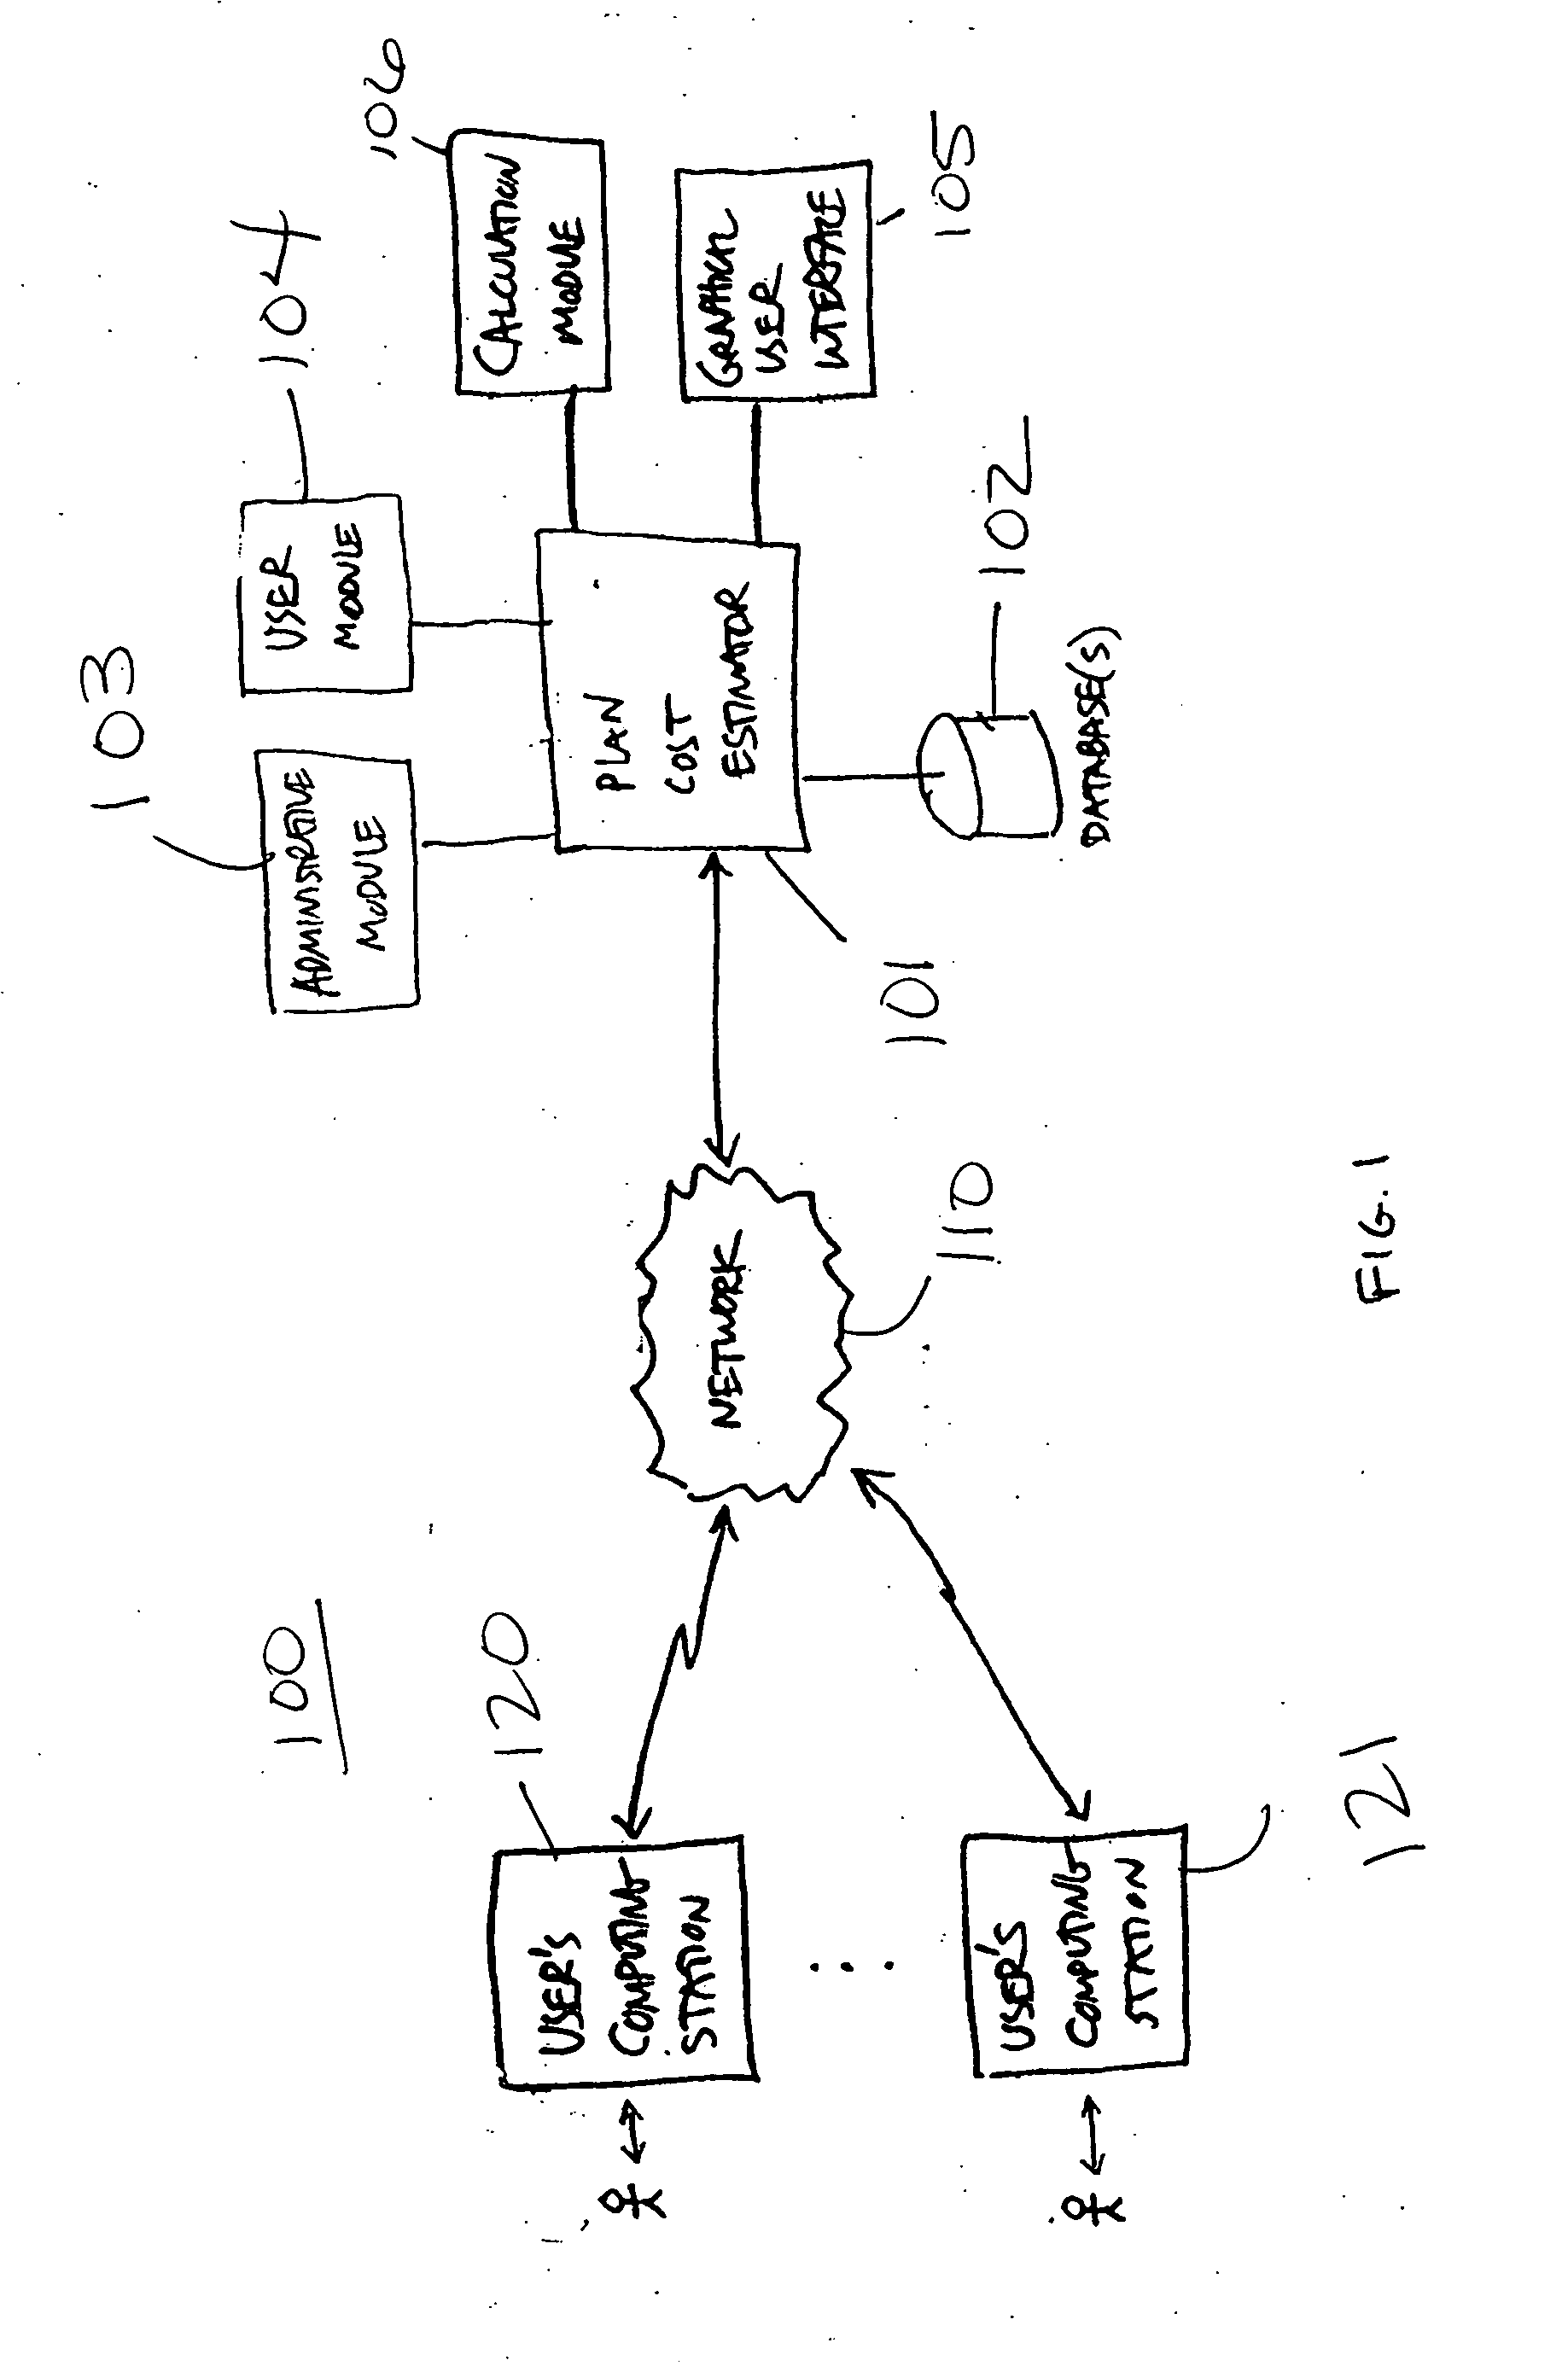 System, method and computer software product for estimating costs under health care plans